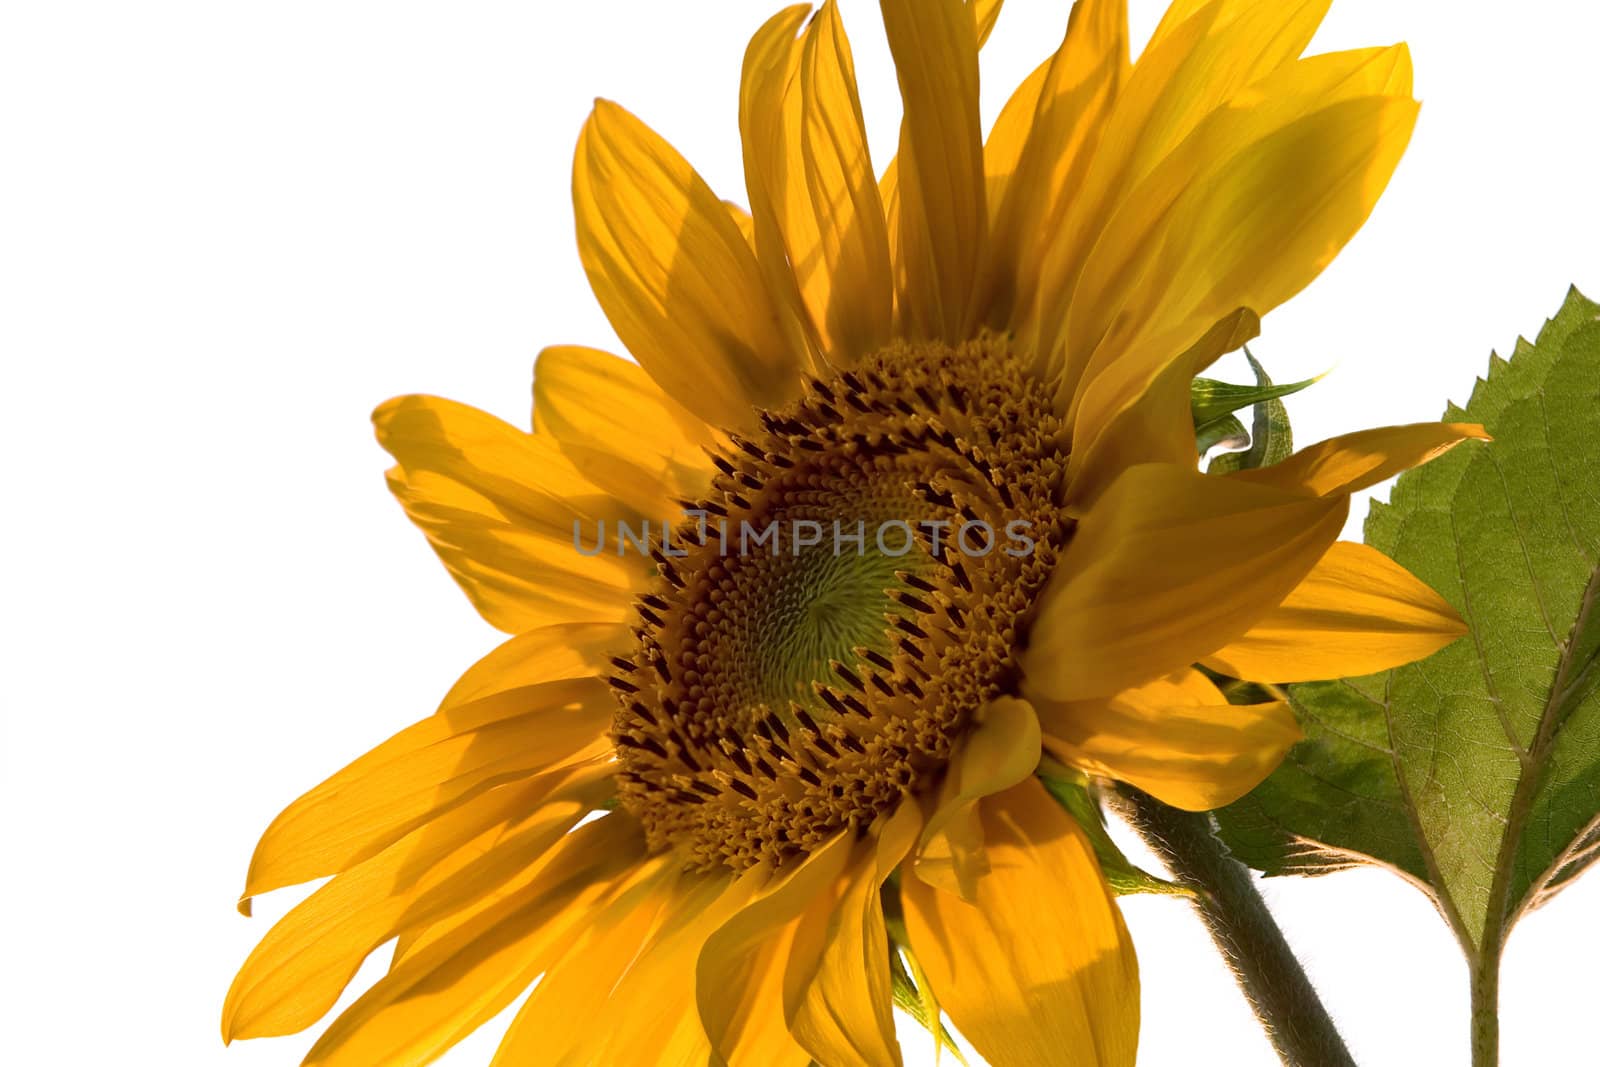 Flower of sunflower on a white background